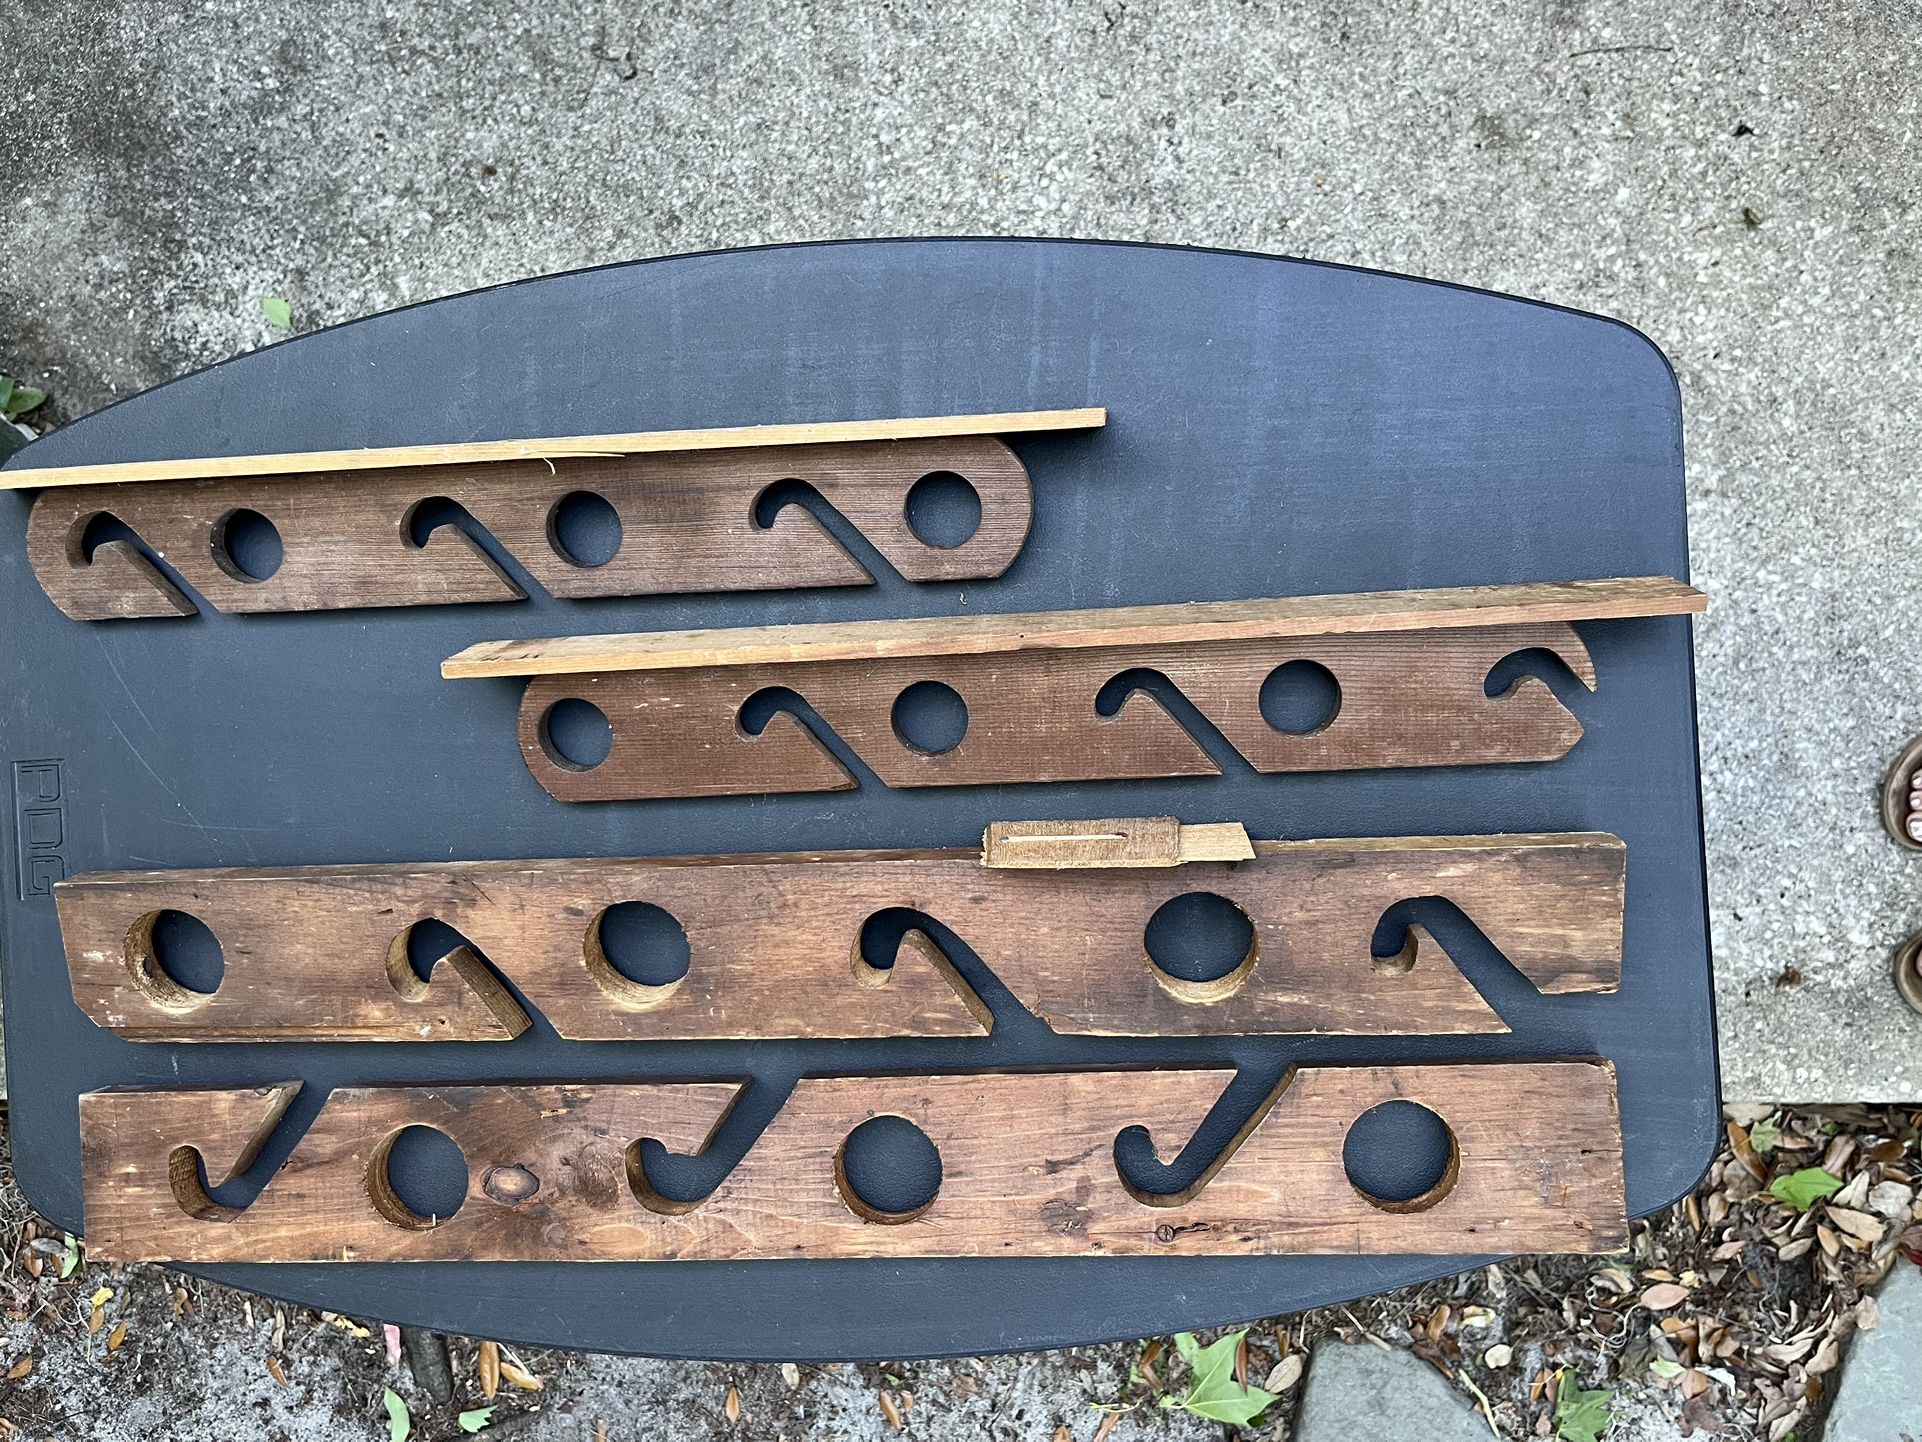 vintage handmade wooden fishing rod holders.  2 sets available $10 each set. 